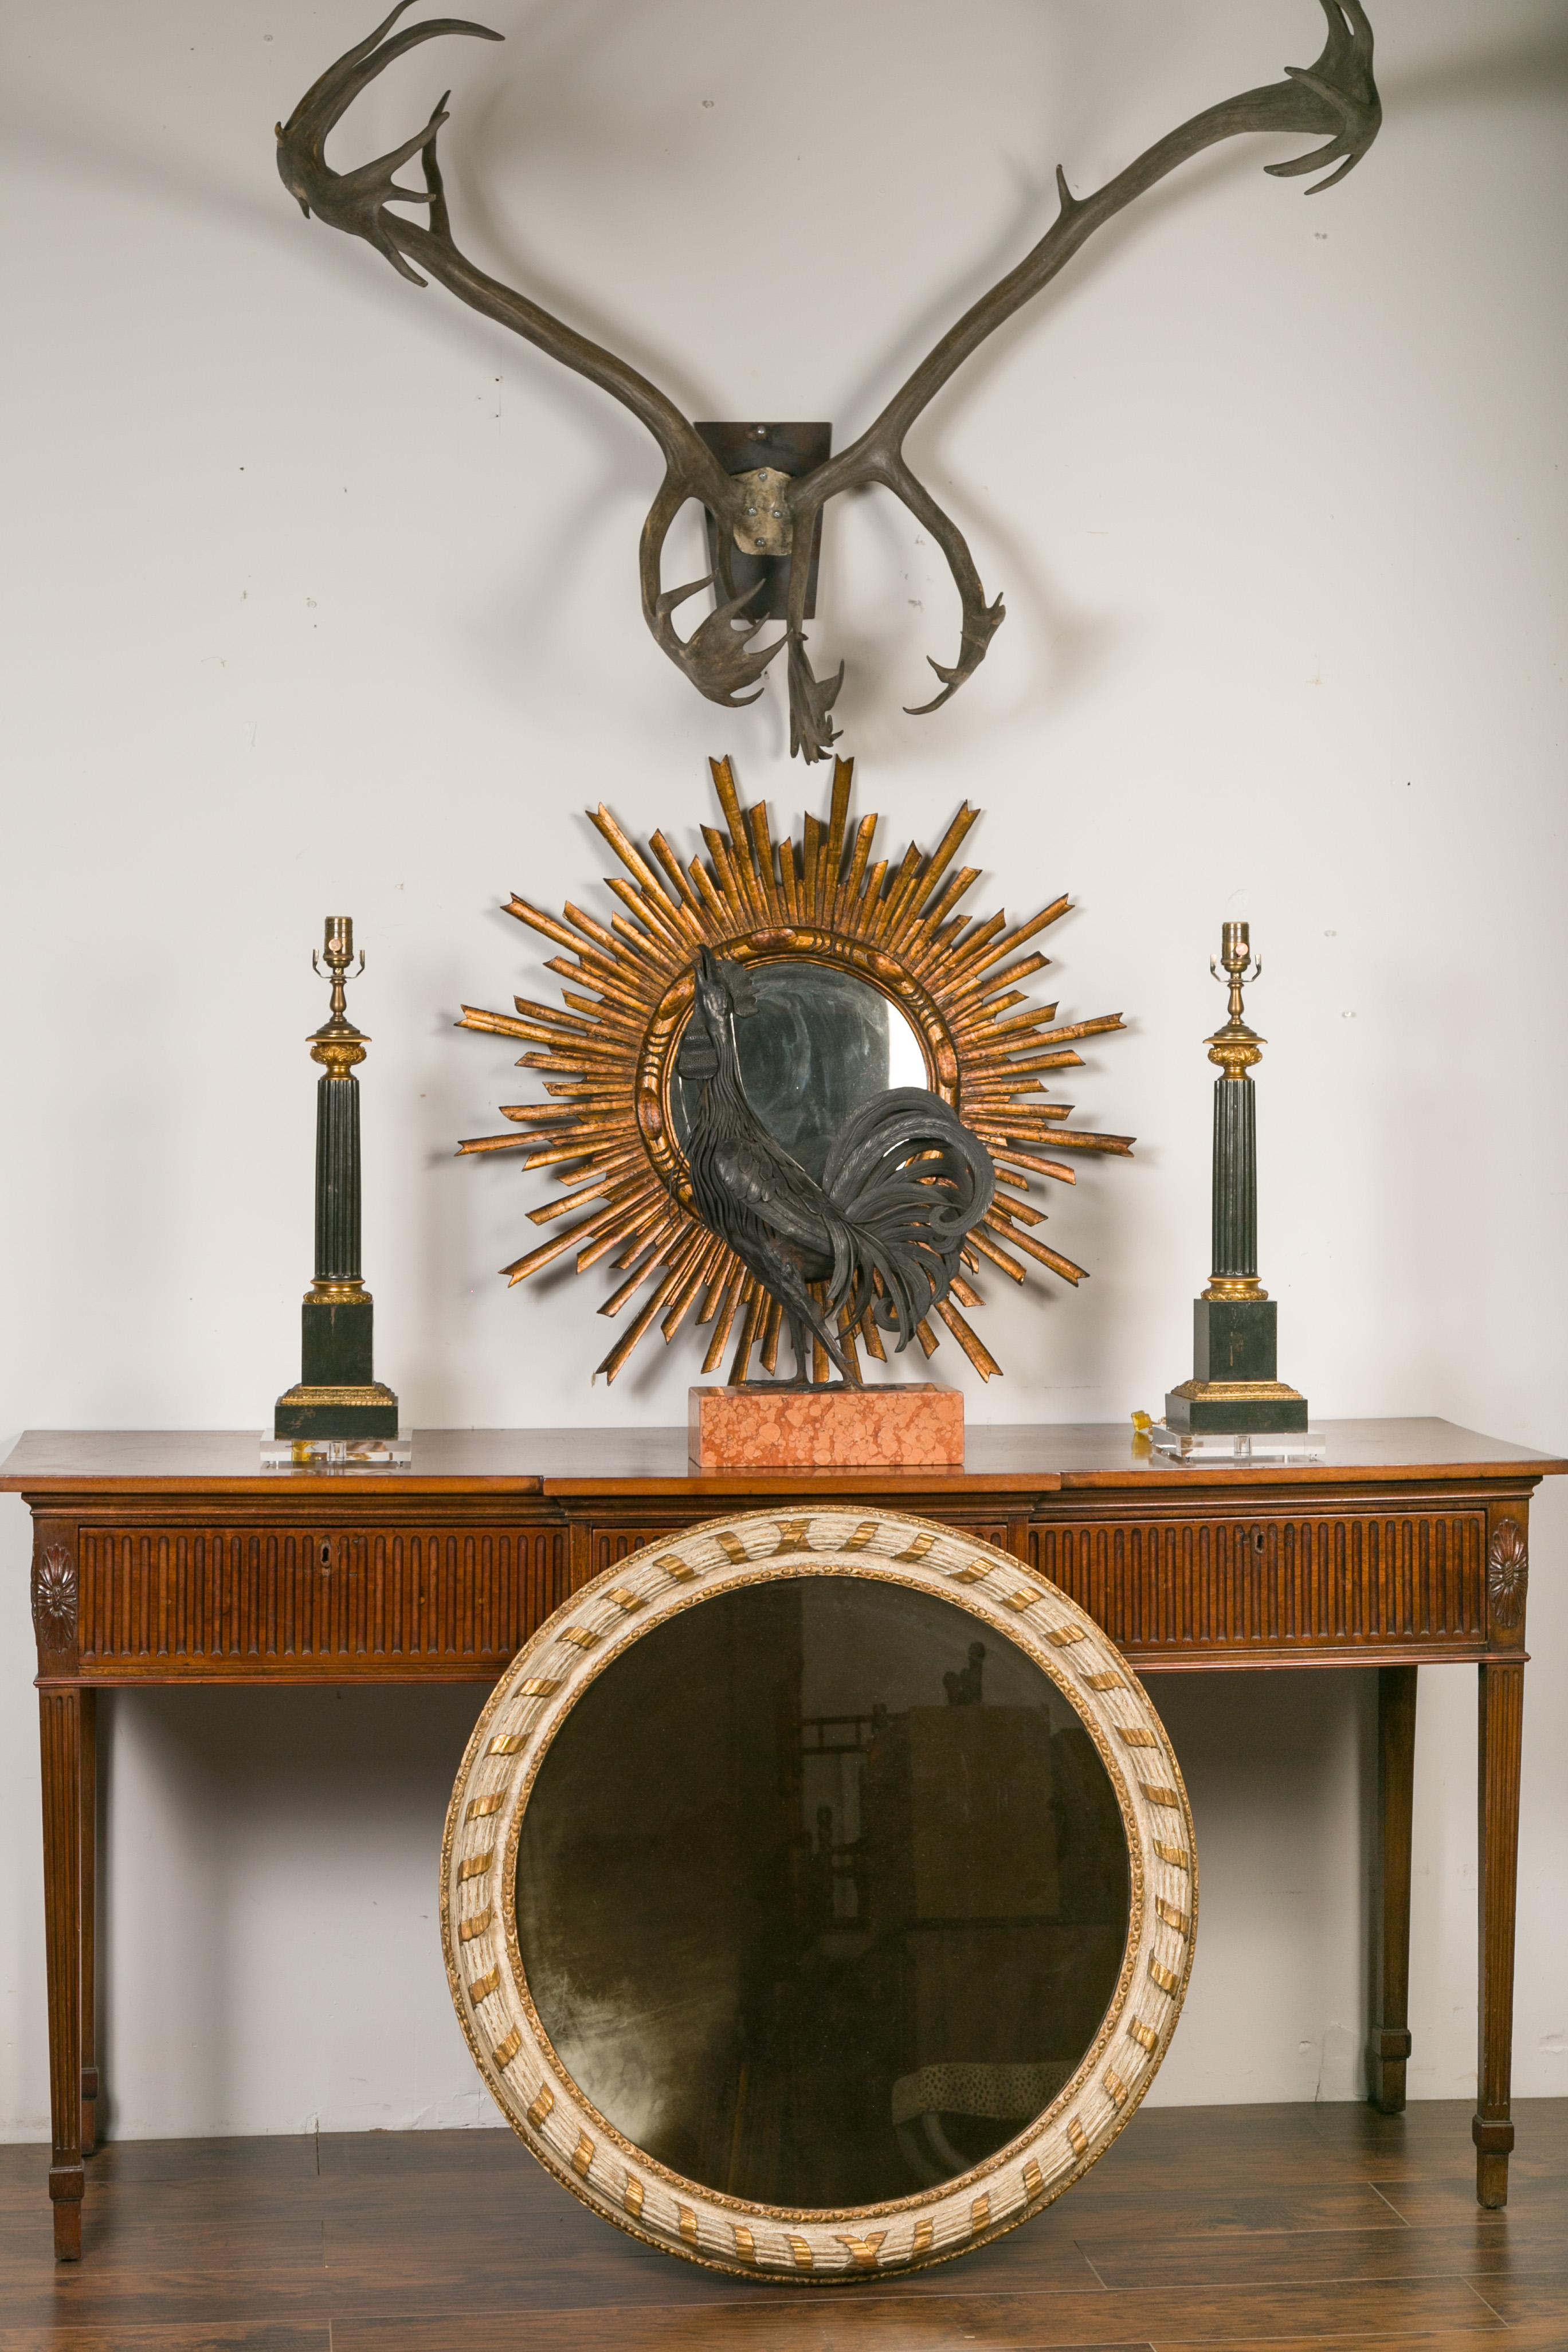 An Italian carved circular parcel-gilt and painted mirror from the late 19th century, with ribbon motif. Created in Italy during the last quarter of the 19th century, this mirror features a cream colored reeded frame highlighted with gilt motifs and